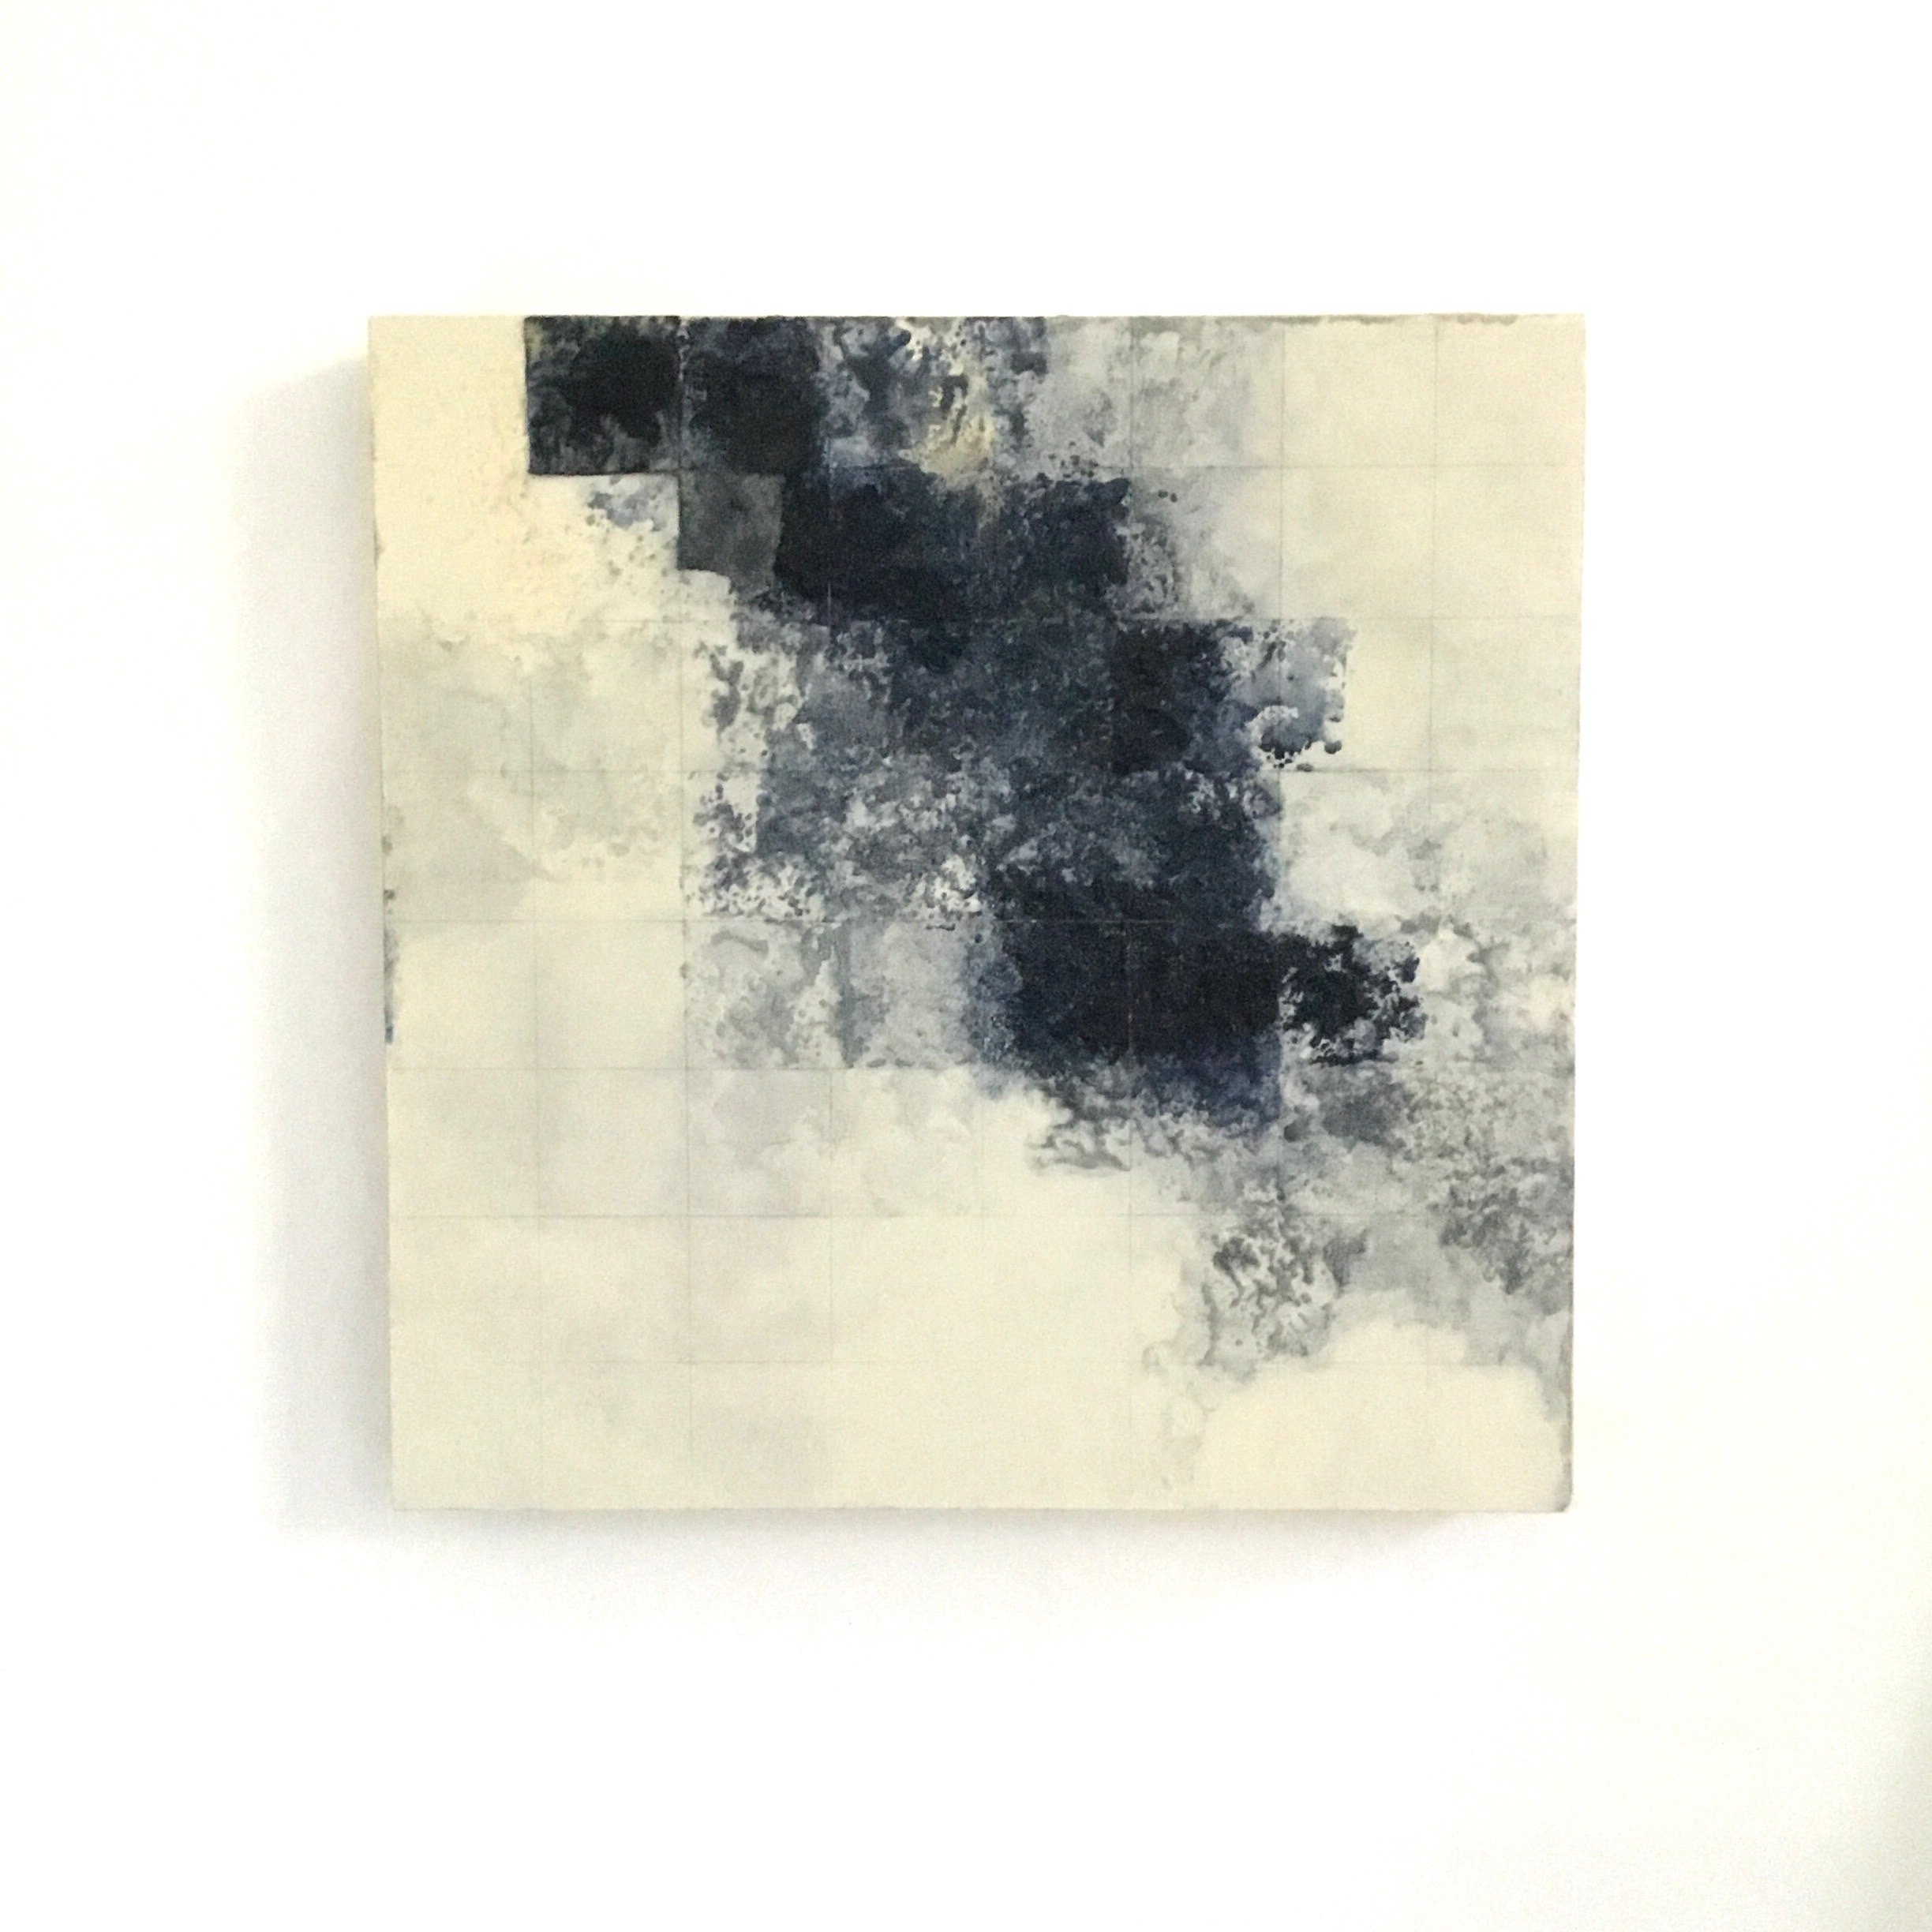   untitled (grey blue)   2022  acrylic, sand and paper on wood panel 